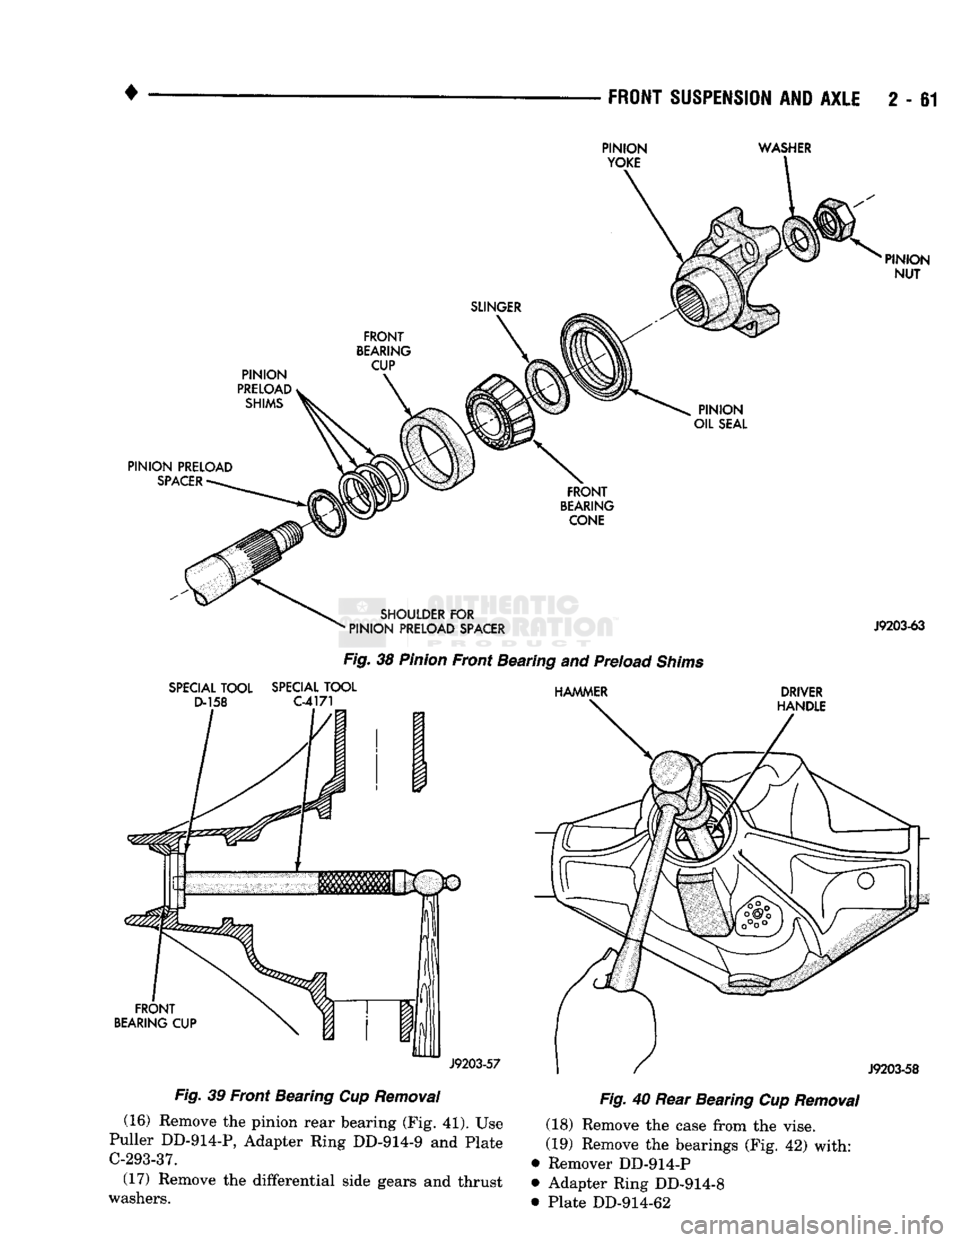 DODGE TRUCK 1993  Service Service Manual 
FRONT
 SUSPENSION
 AND
 AXLE
 2 - 61 

PINION 

YOKE 
 WASHER 

SLINGER 

PINION 

PRELOAD, 
 SHIMS 
 FRONT 

BEARING 
 CUP 
 PINION 

NUT 

PINION 
OIL
 SEAL 

PINION PRELOAD 
 SPACER 
 FRONT 

BEAR